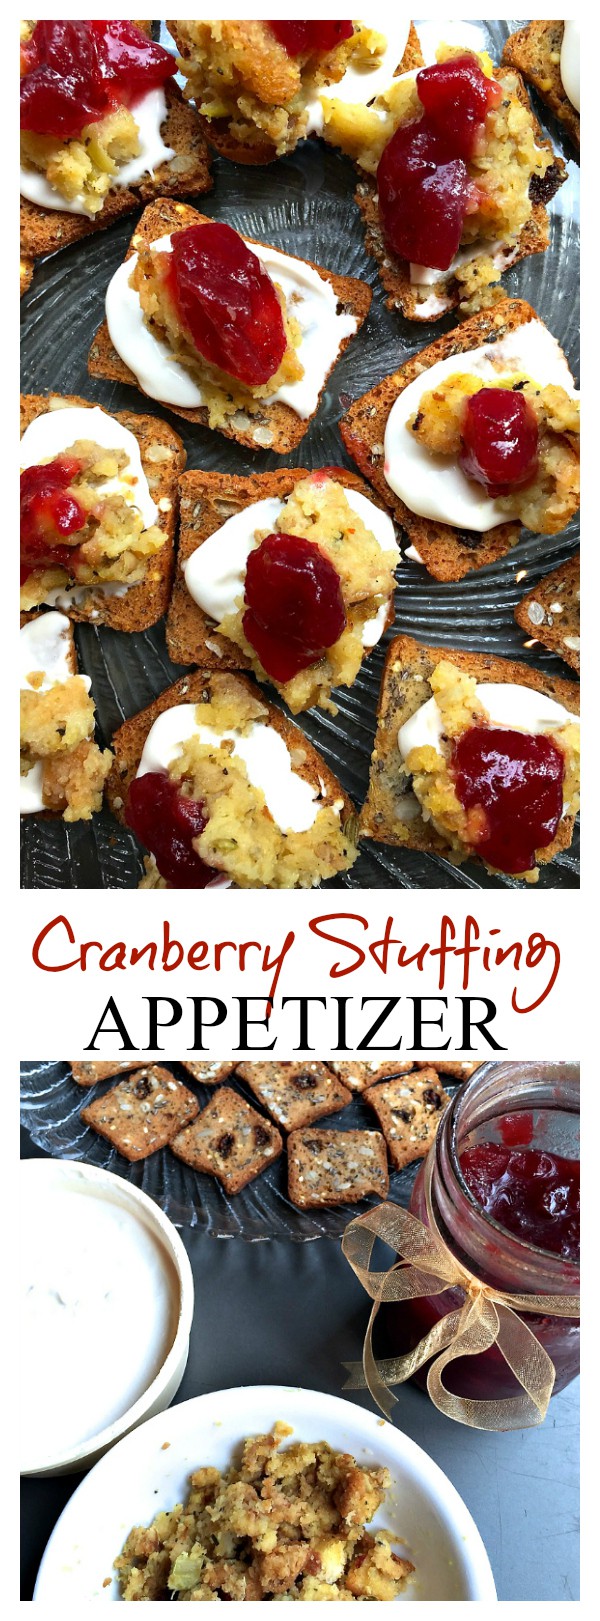 Etiquette tips for ending a party with style and grace, with a delicious Cranberry Stuffing Appetizer